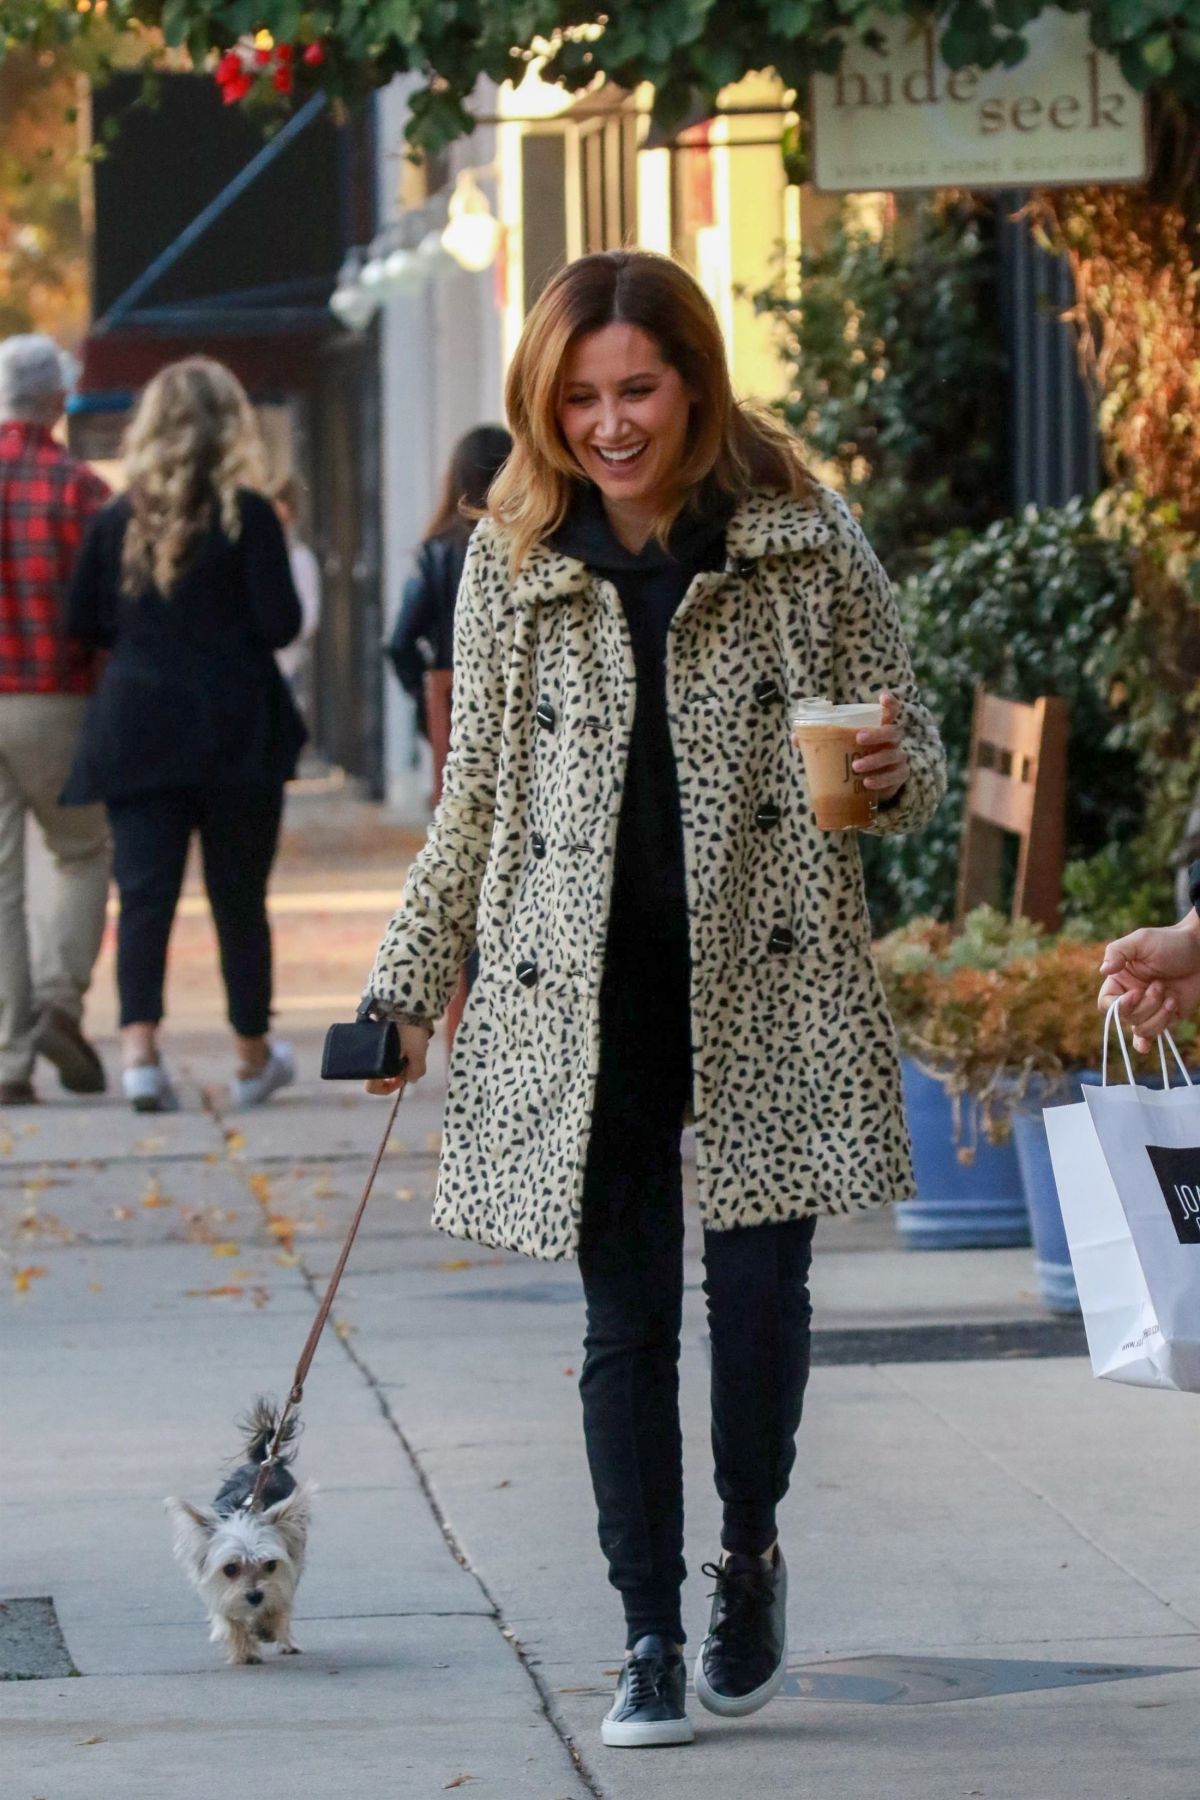 Ashley Tisdale Getting Coffee January 16, 2018 – Star Style